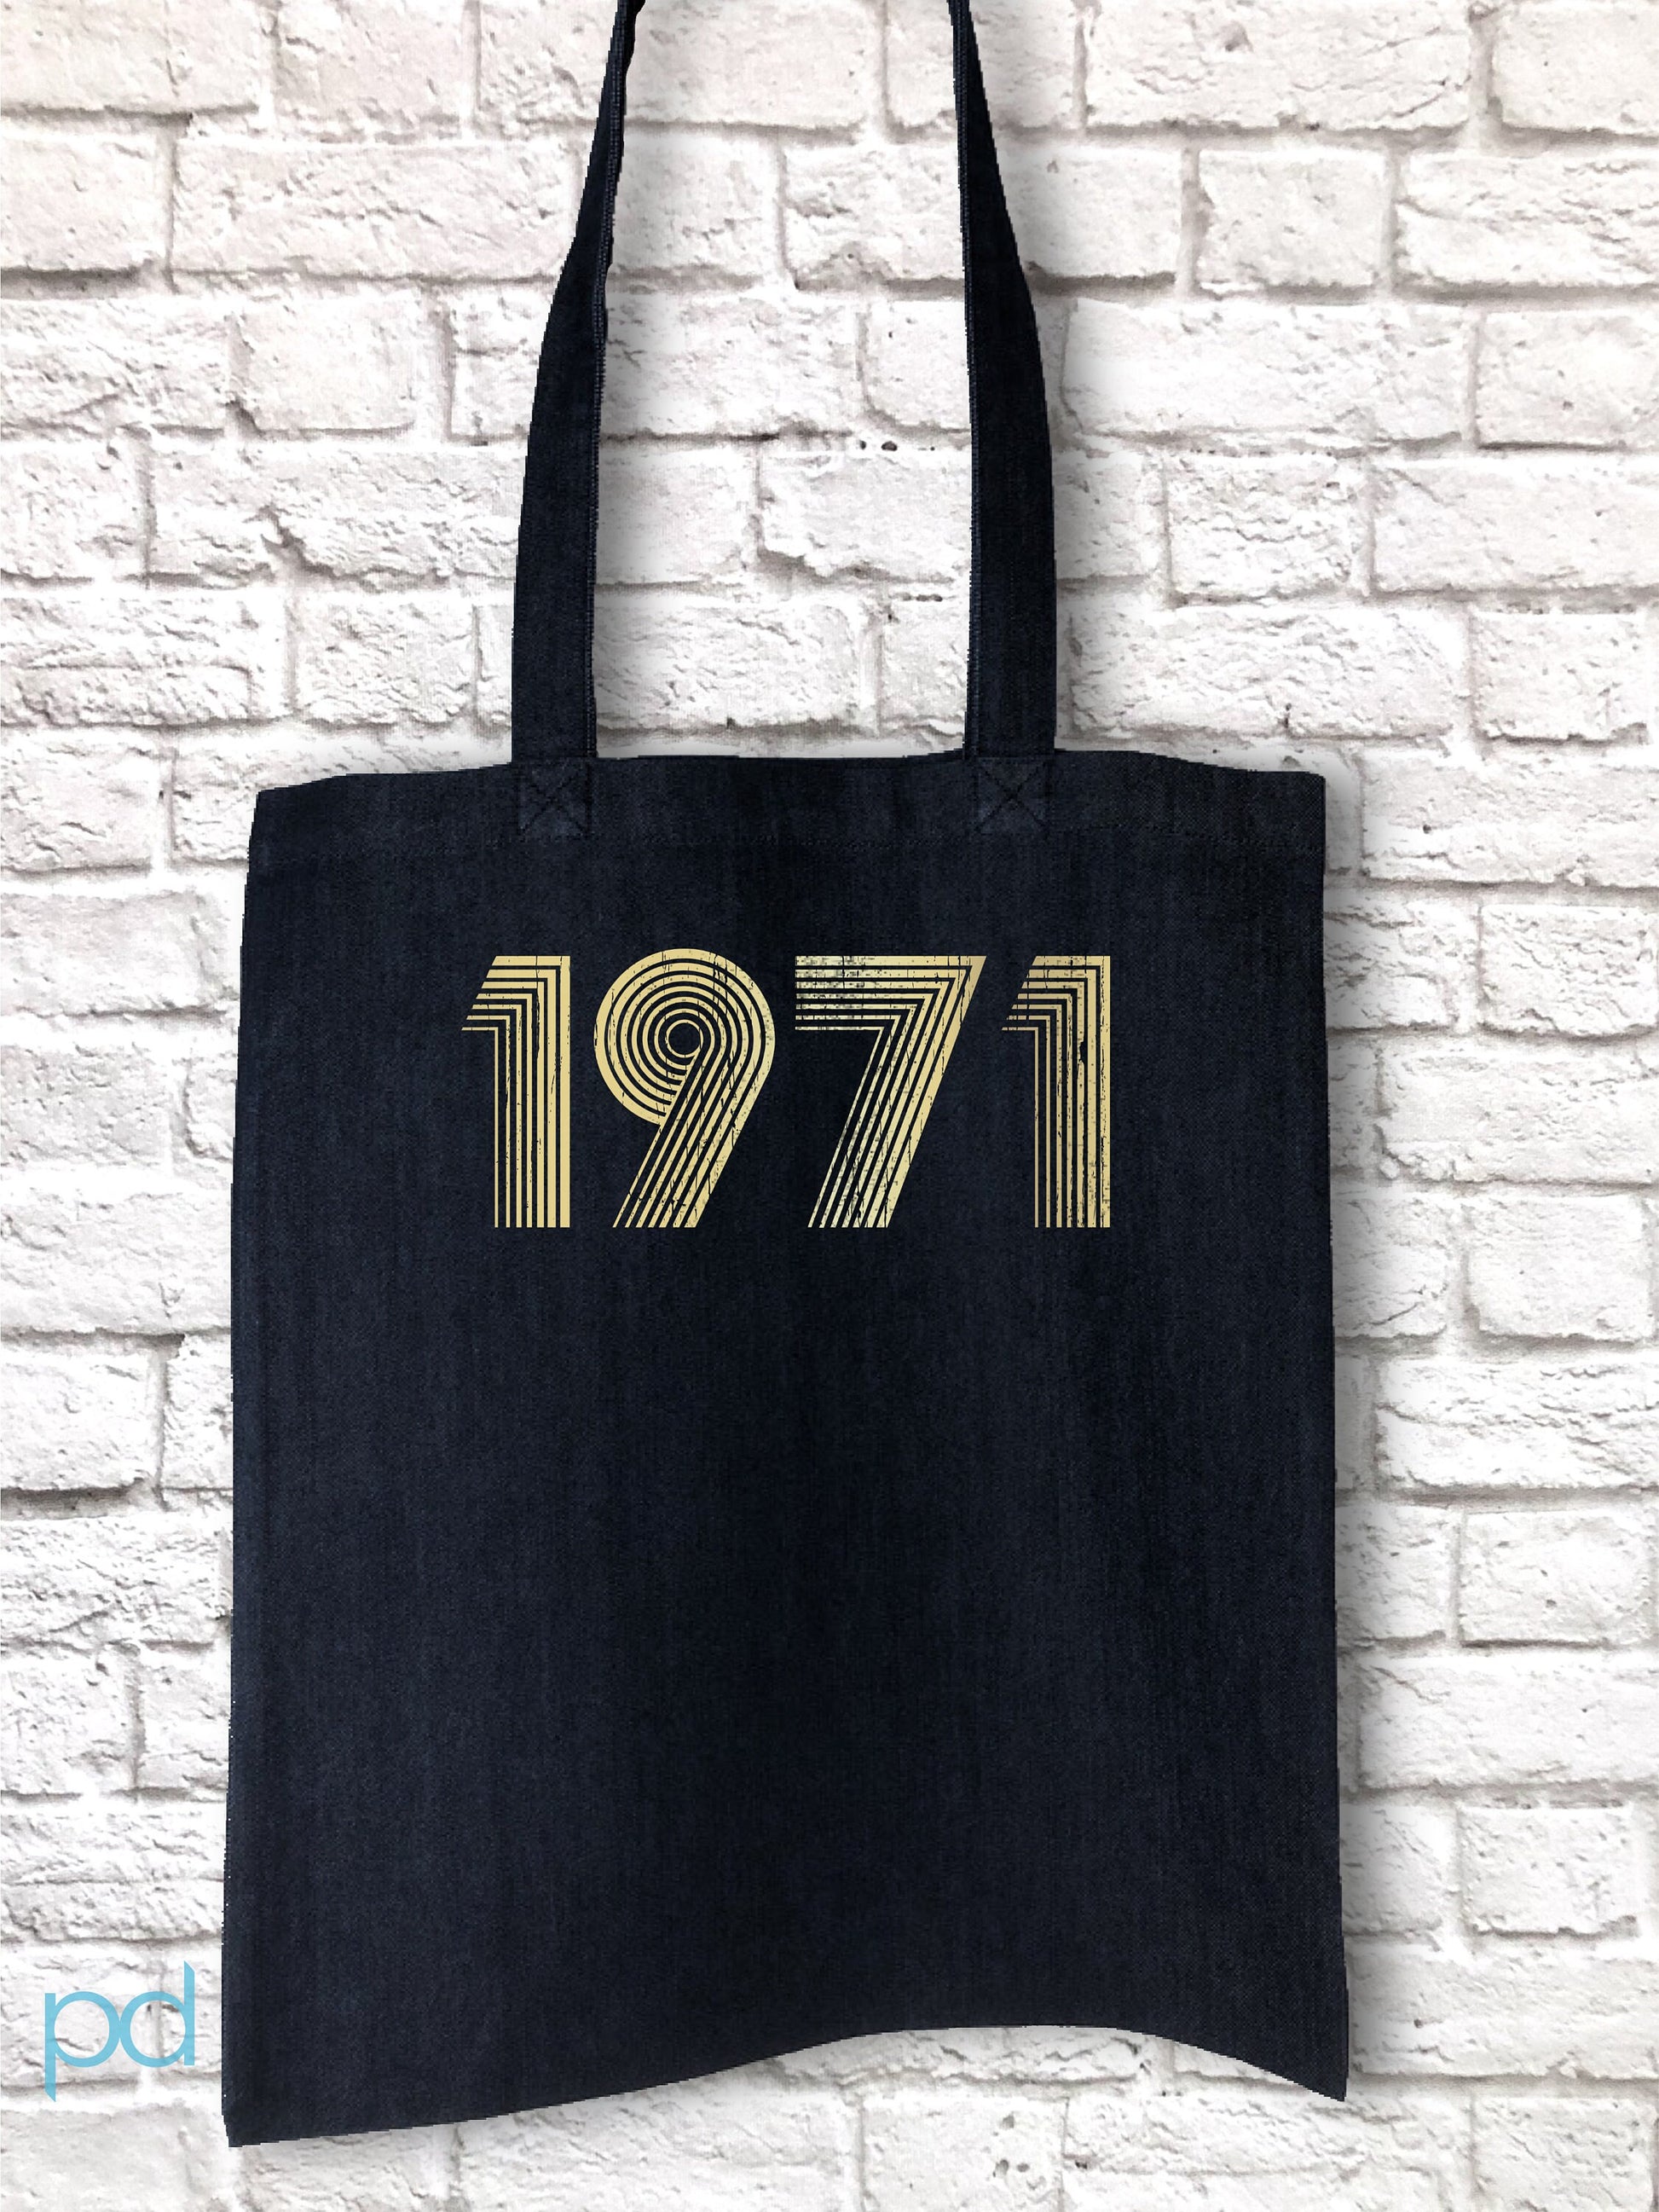 1971 Tote Bag Metallic Gold Foil, 51st Birthday Gift Tote Bag in Vintage 70s style, Fiftieth Reusable Shopping Carrier Bag